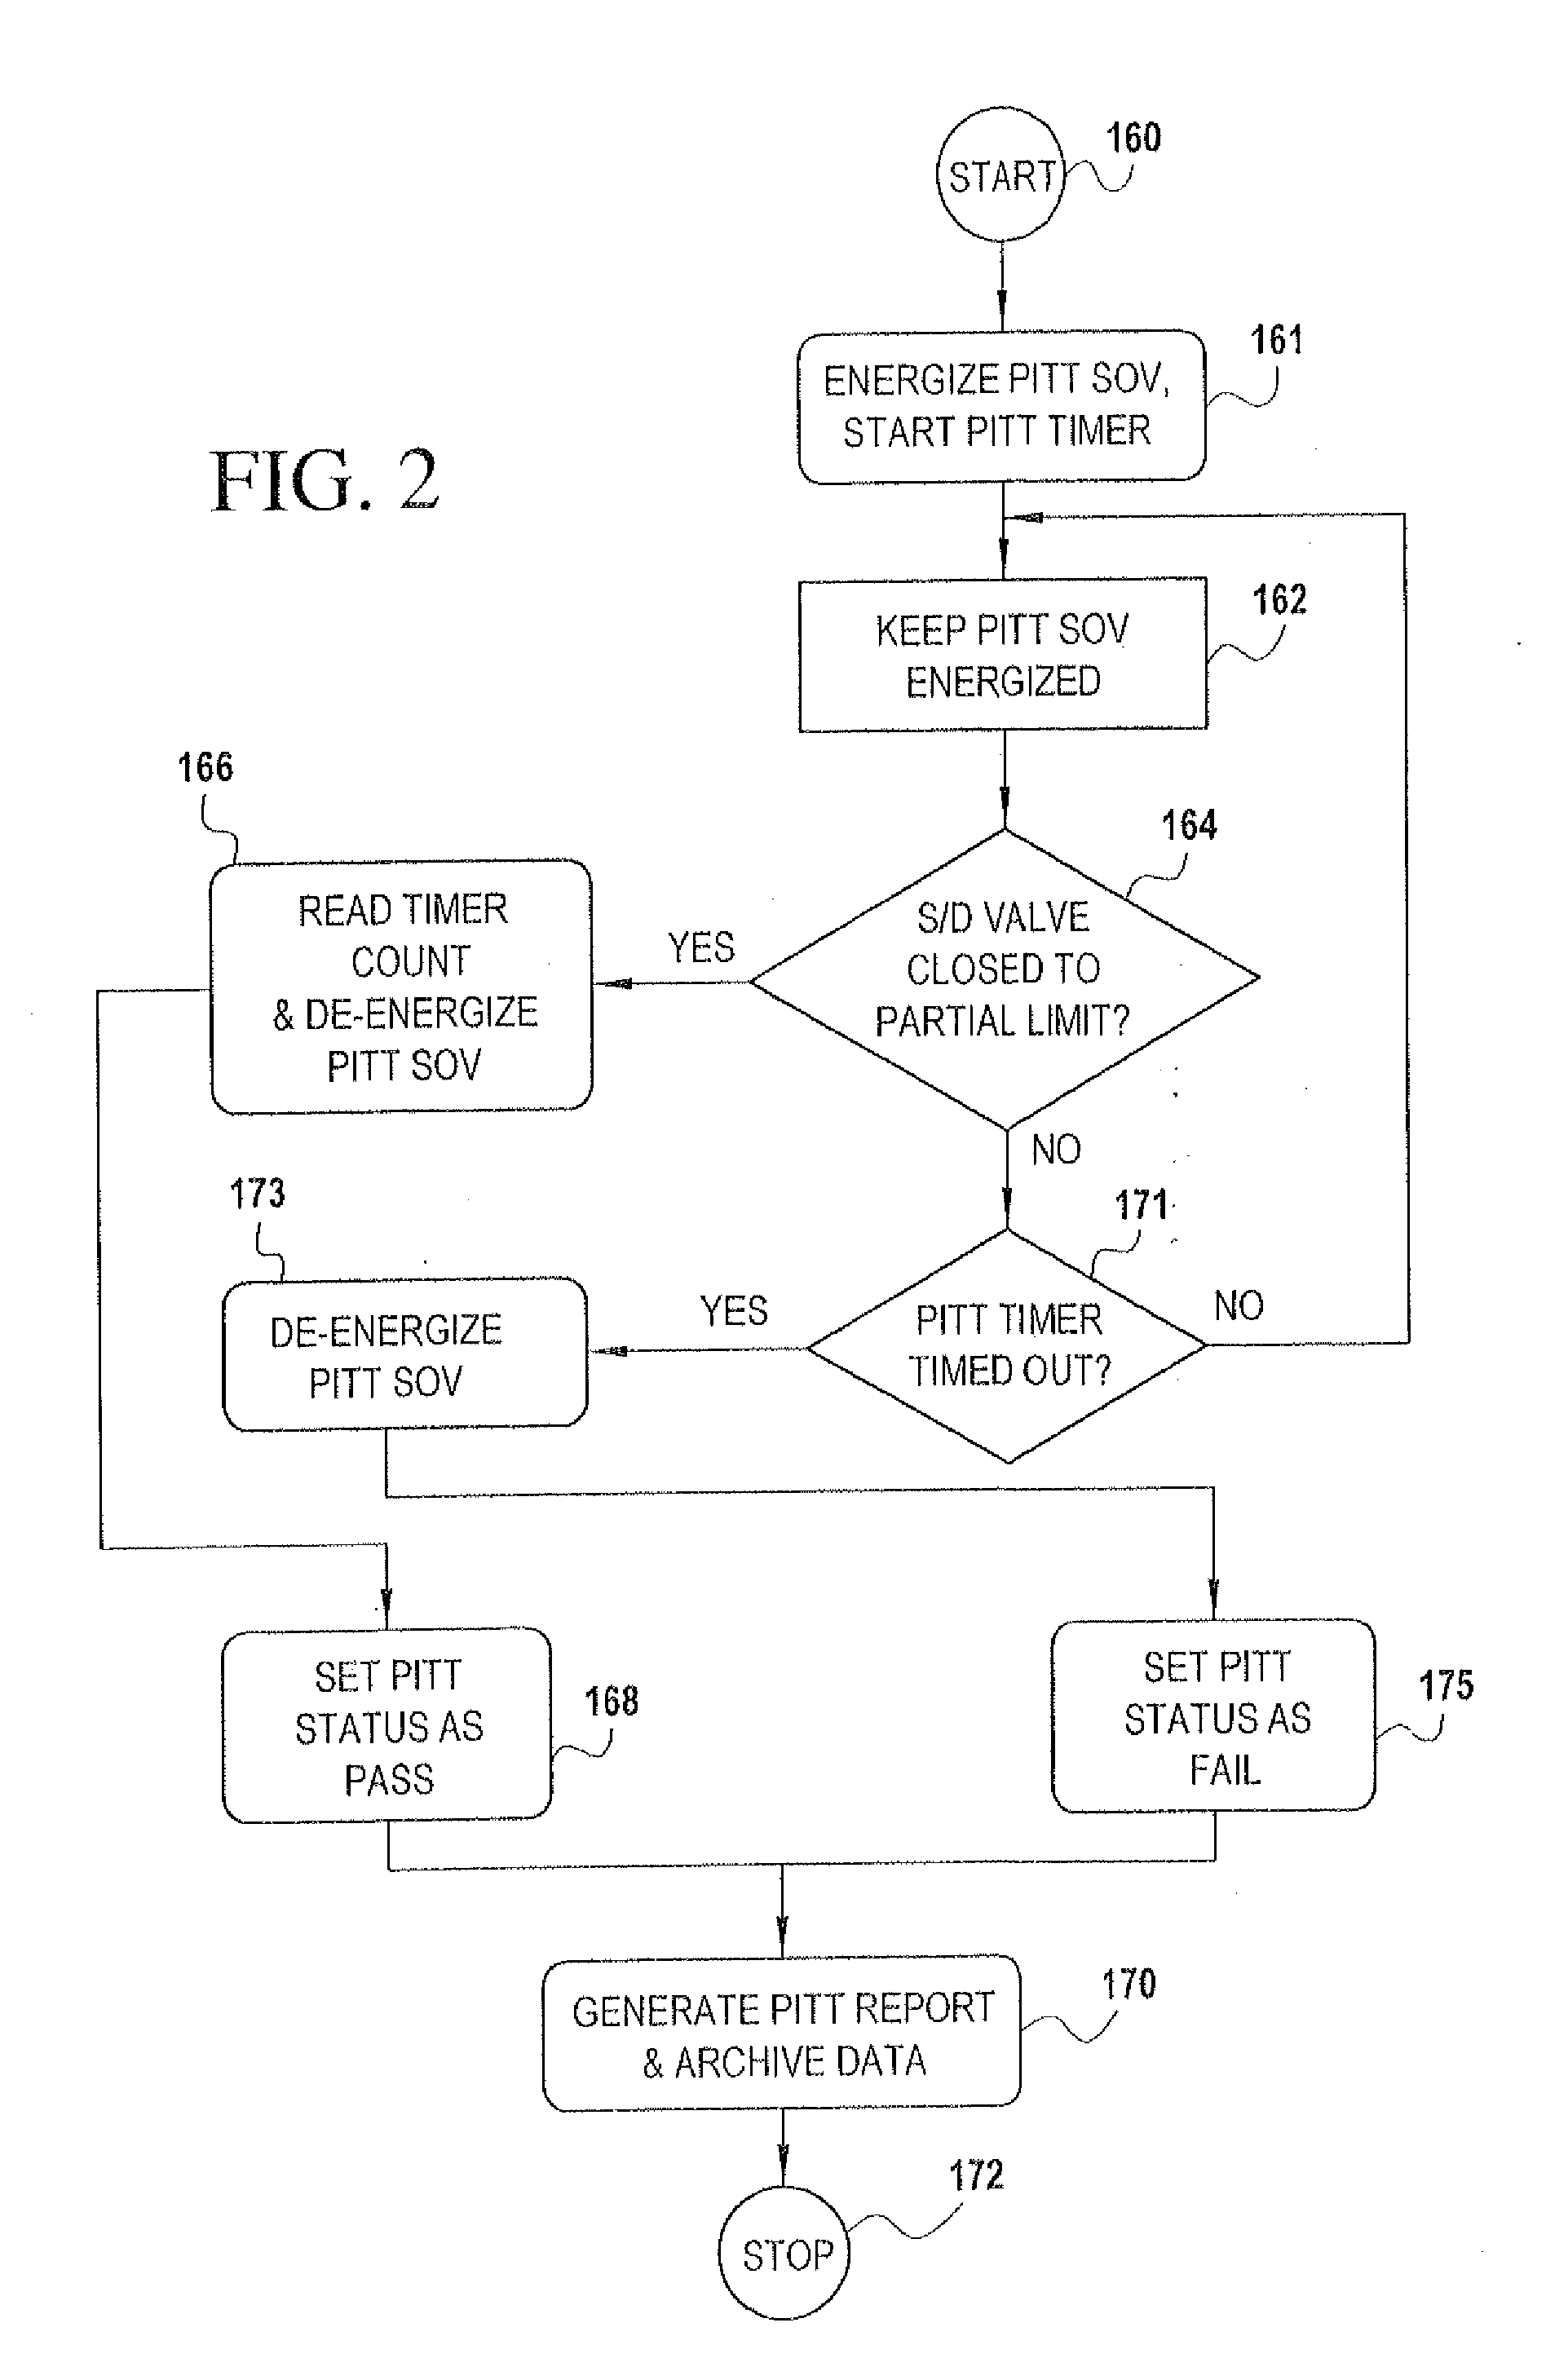 Partial stroke testing system coupled with fuel control valve